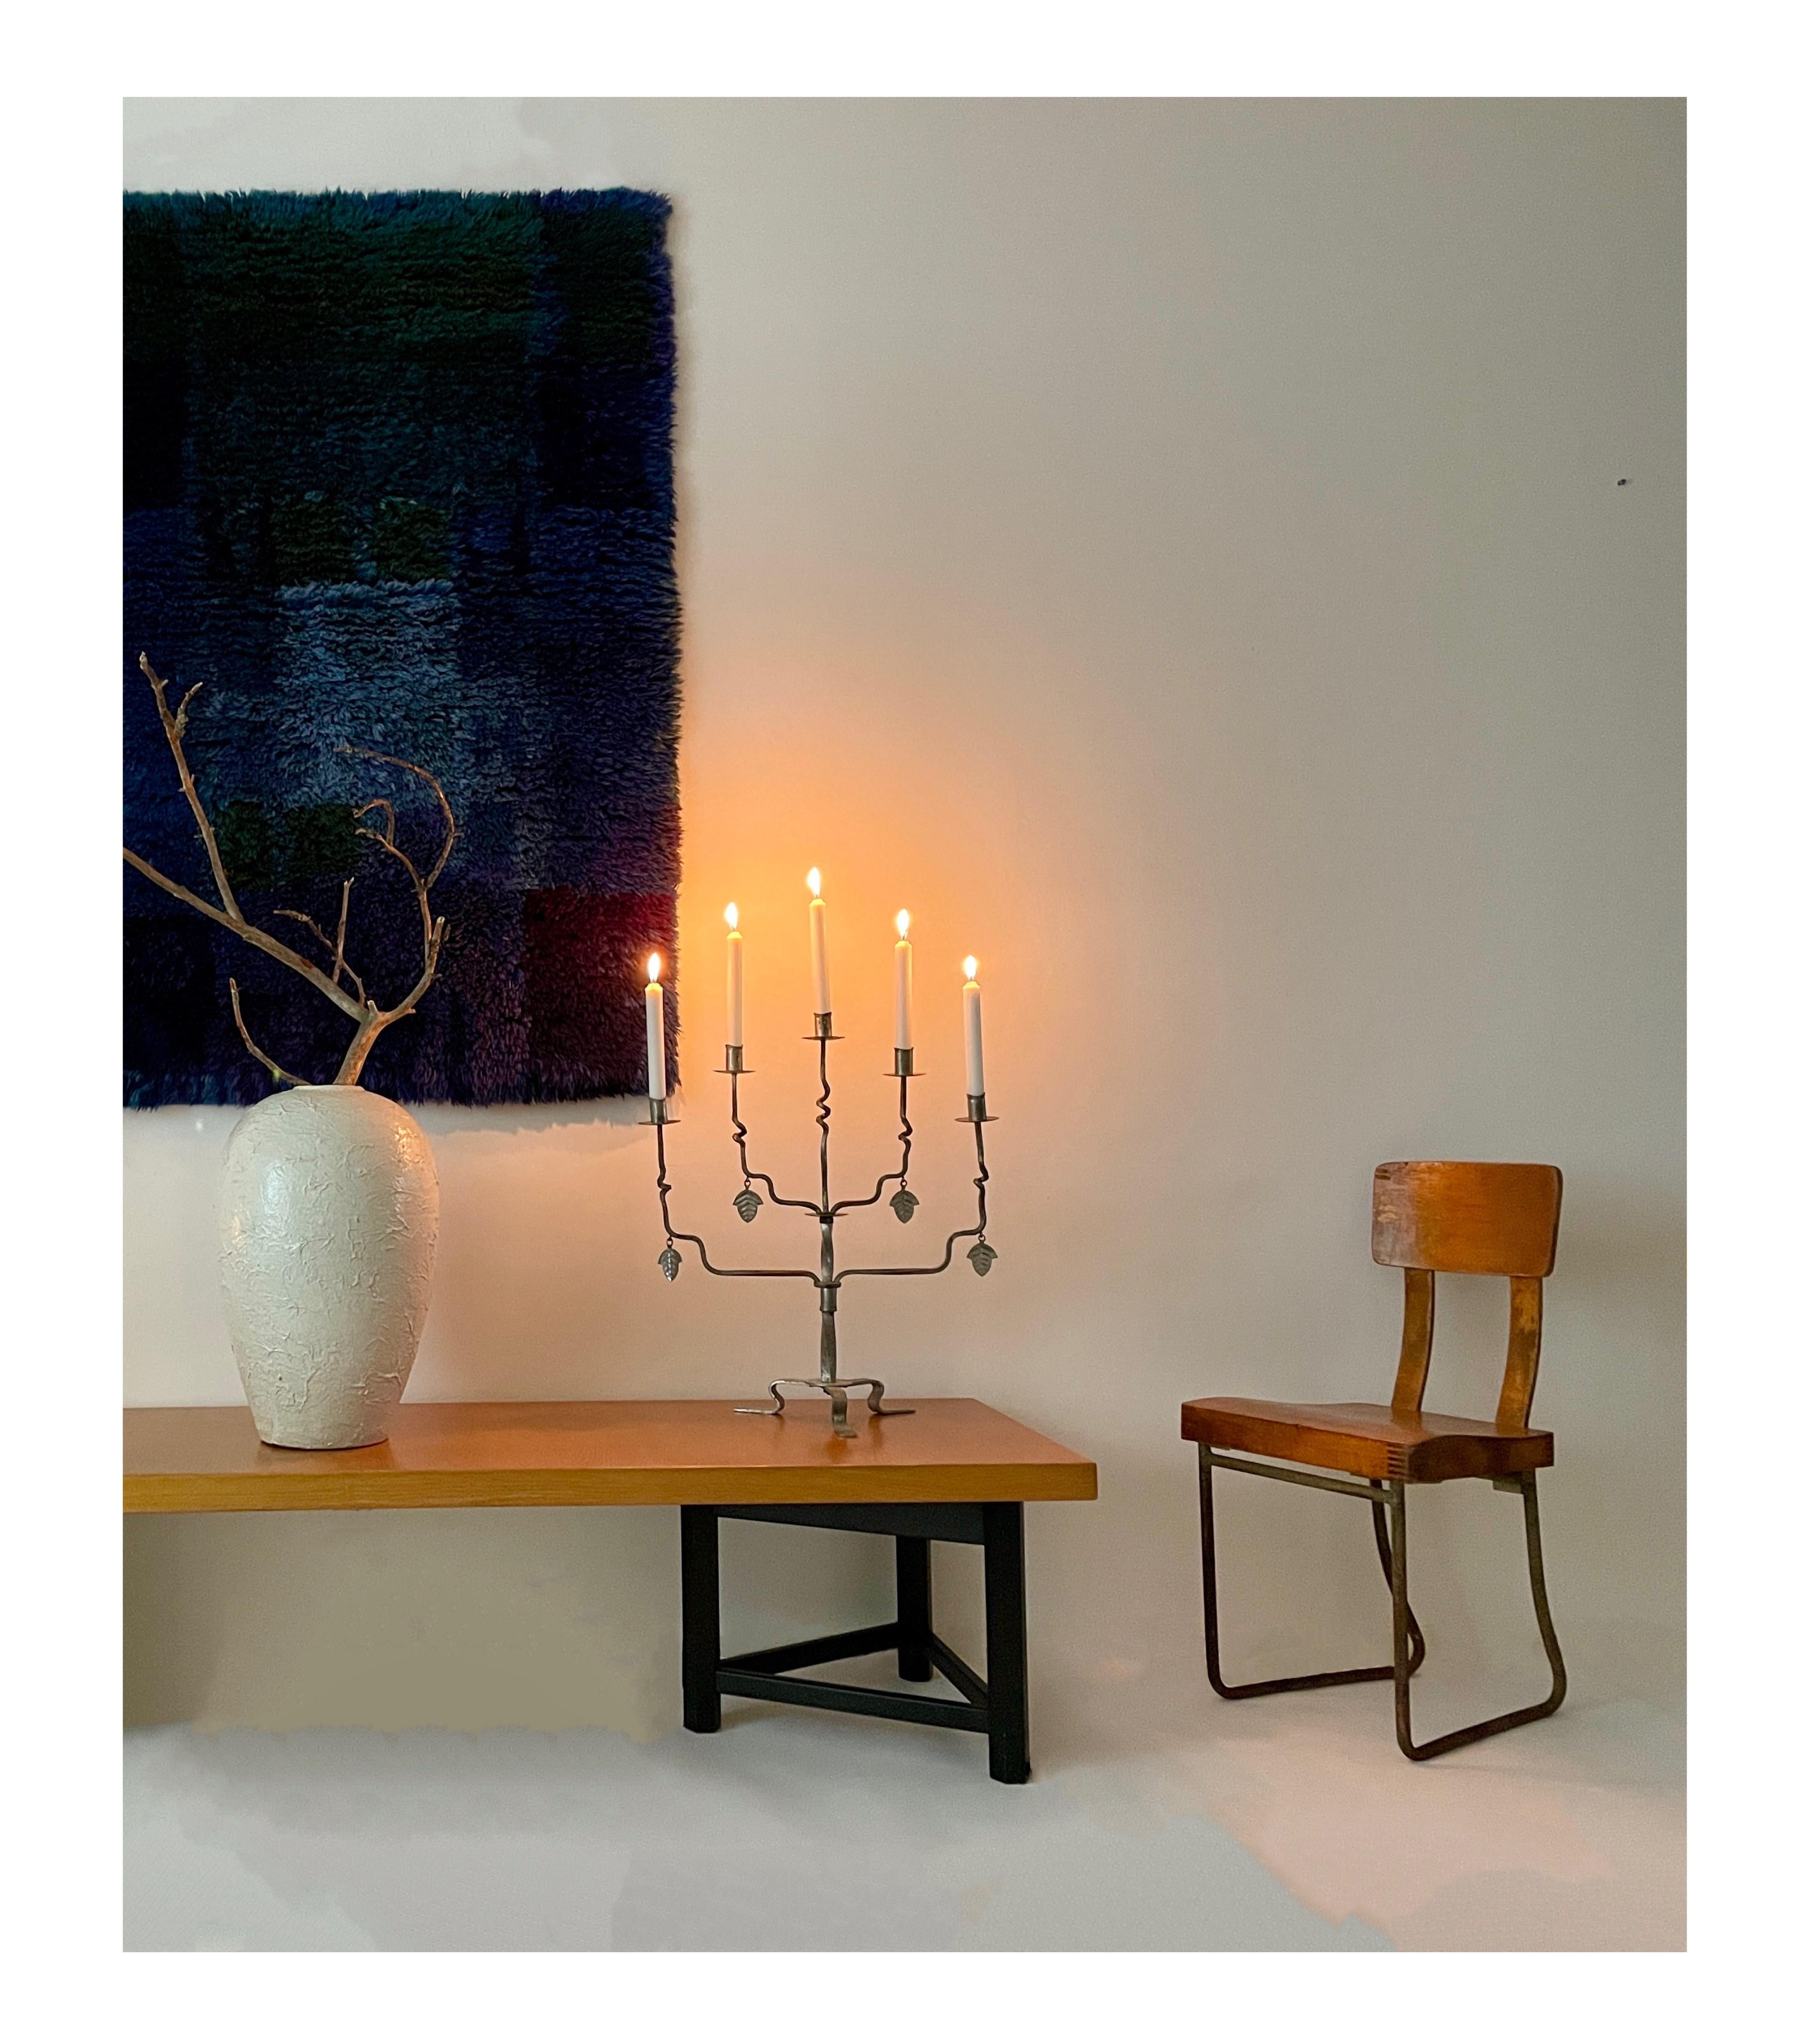 The Hilding Ekelund Candelabra (documented) is a harmonious blend of artistry and functionality. Crafted from exquisite metal and produced by Taidetakomo Hakkarainen, this piece boasts delicate metal leaves that impart a touch of sophistication to